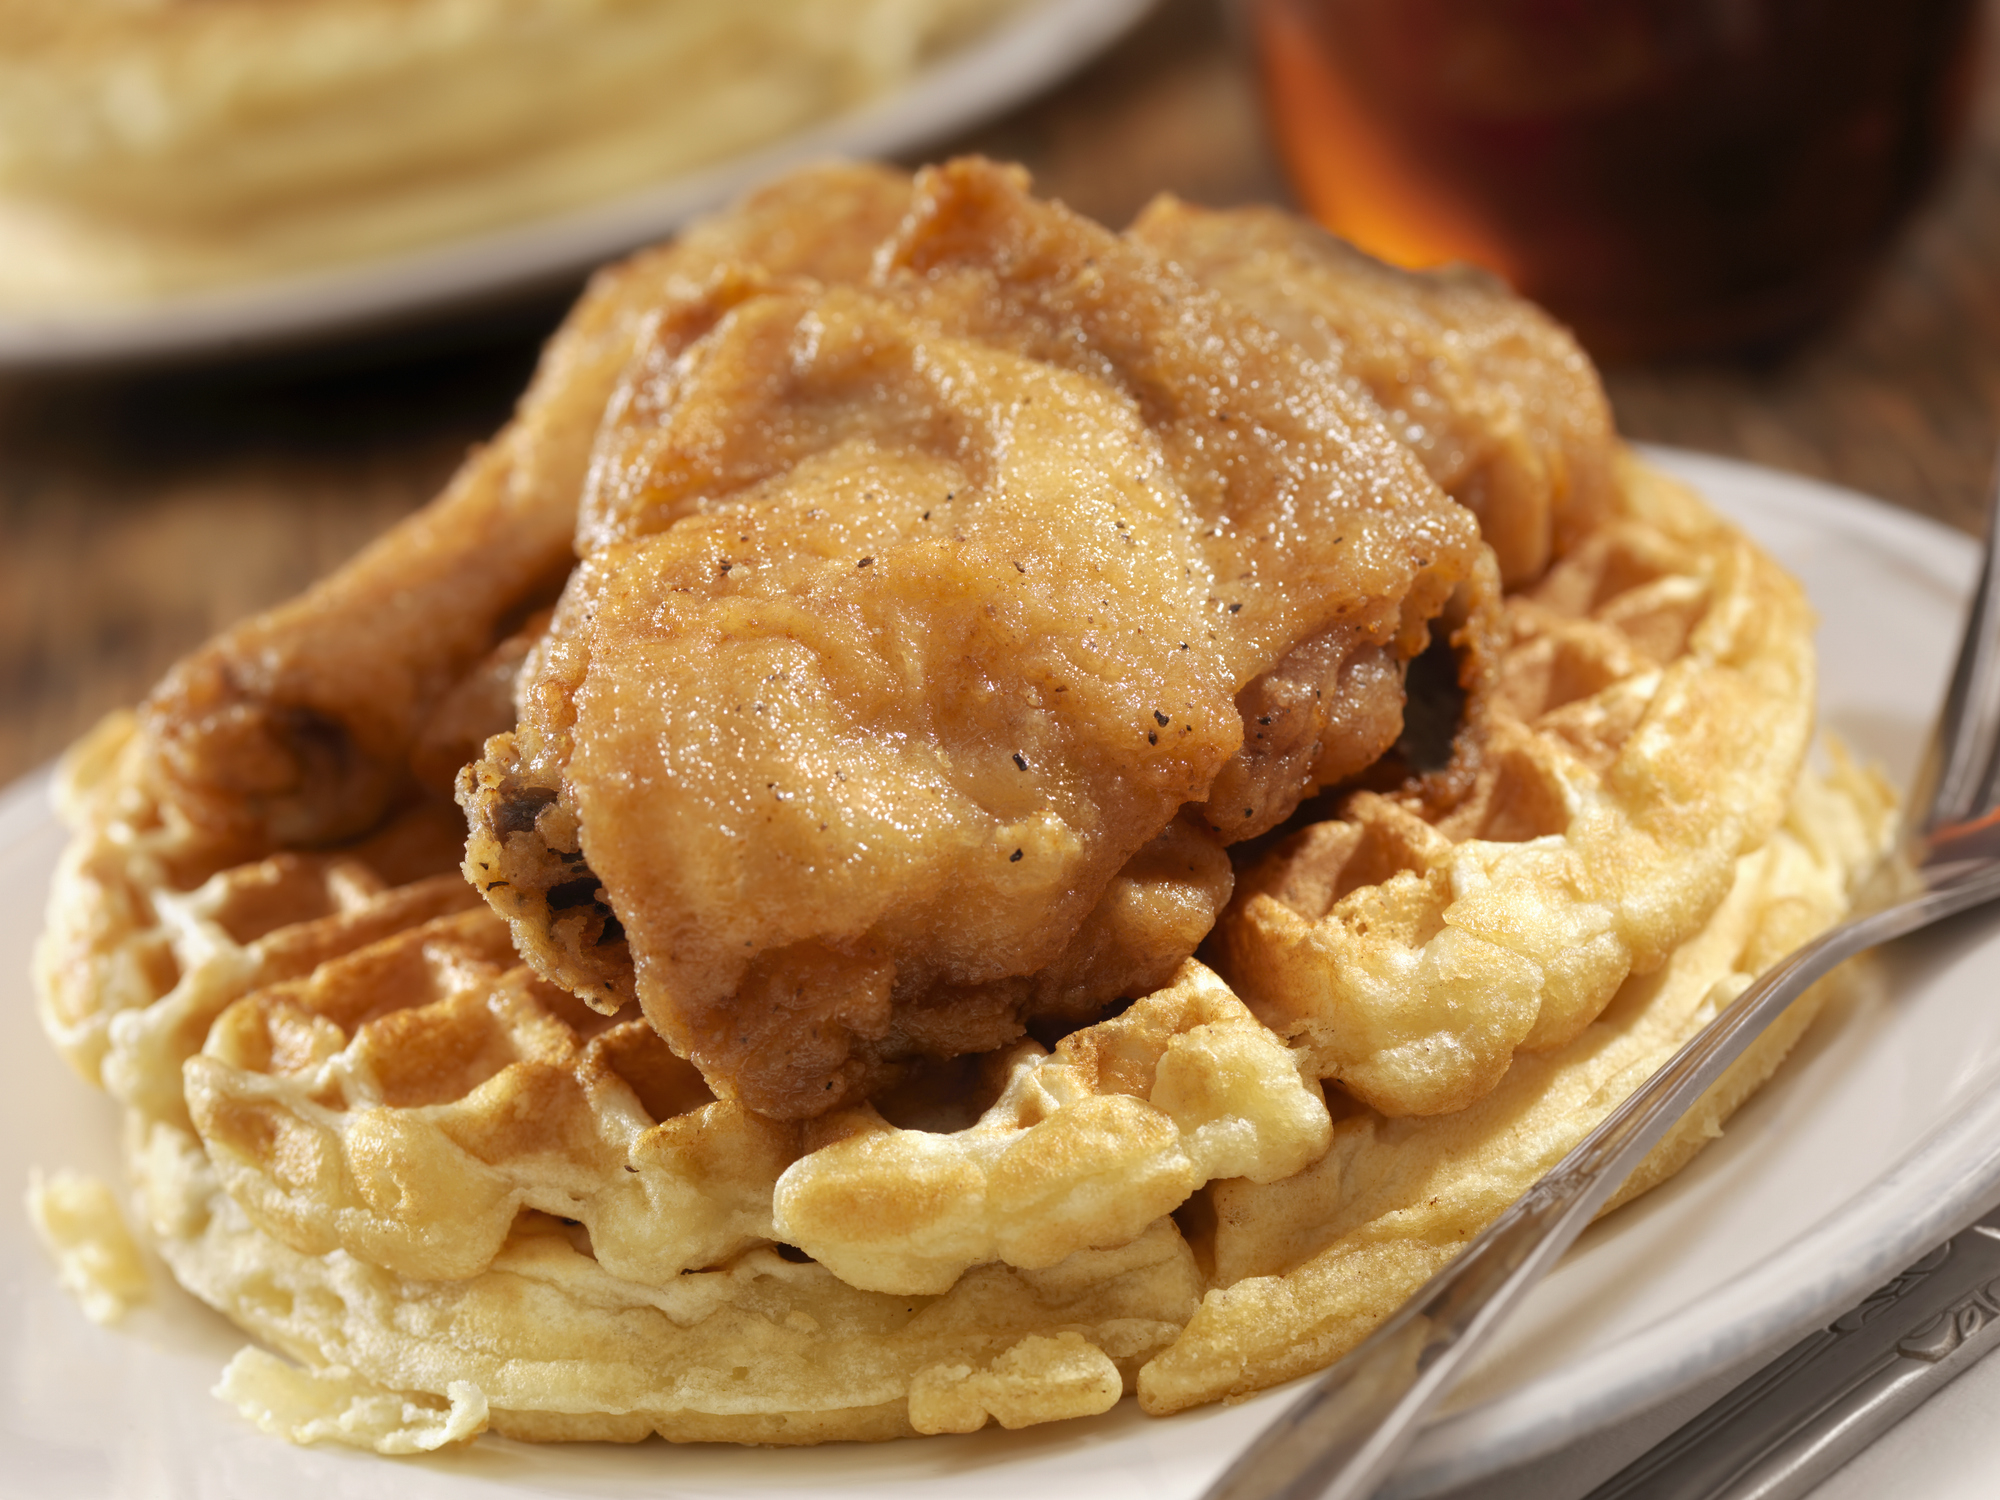 Fried chicken on a waffle with syrup on the side, commonly known as chicken and waffles